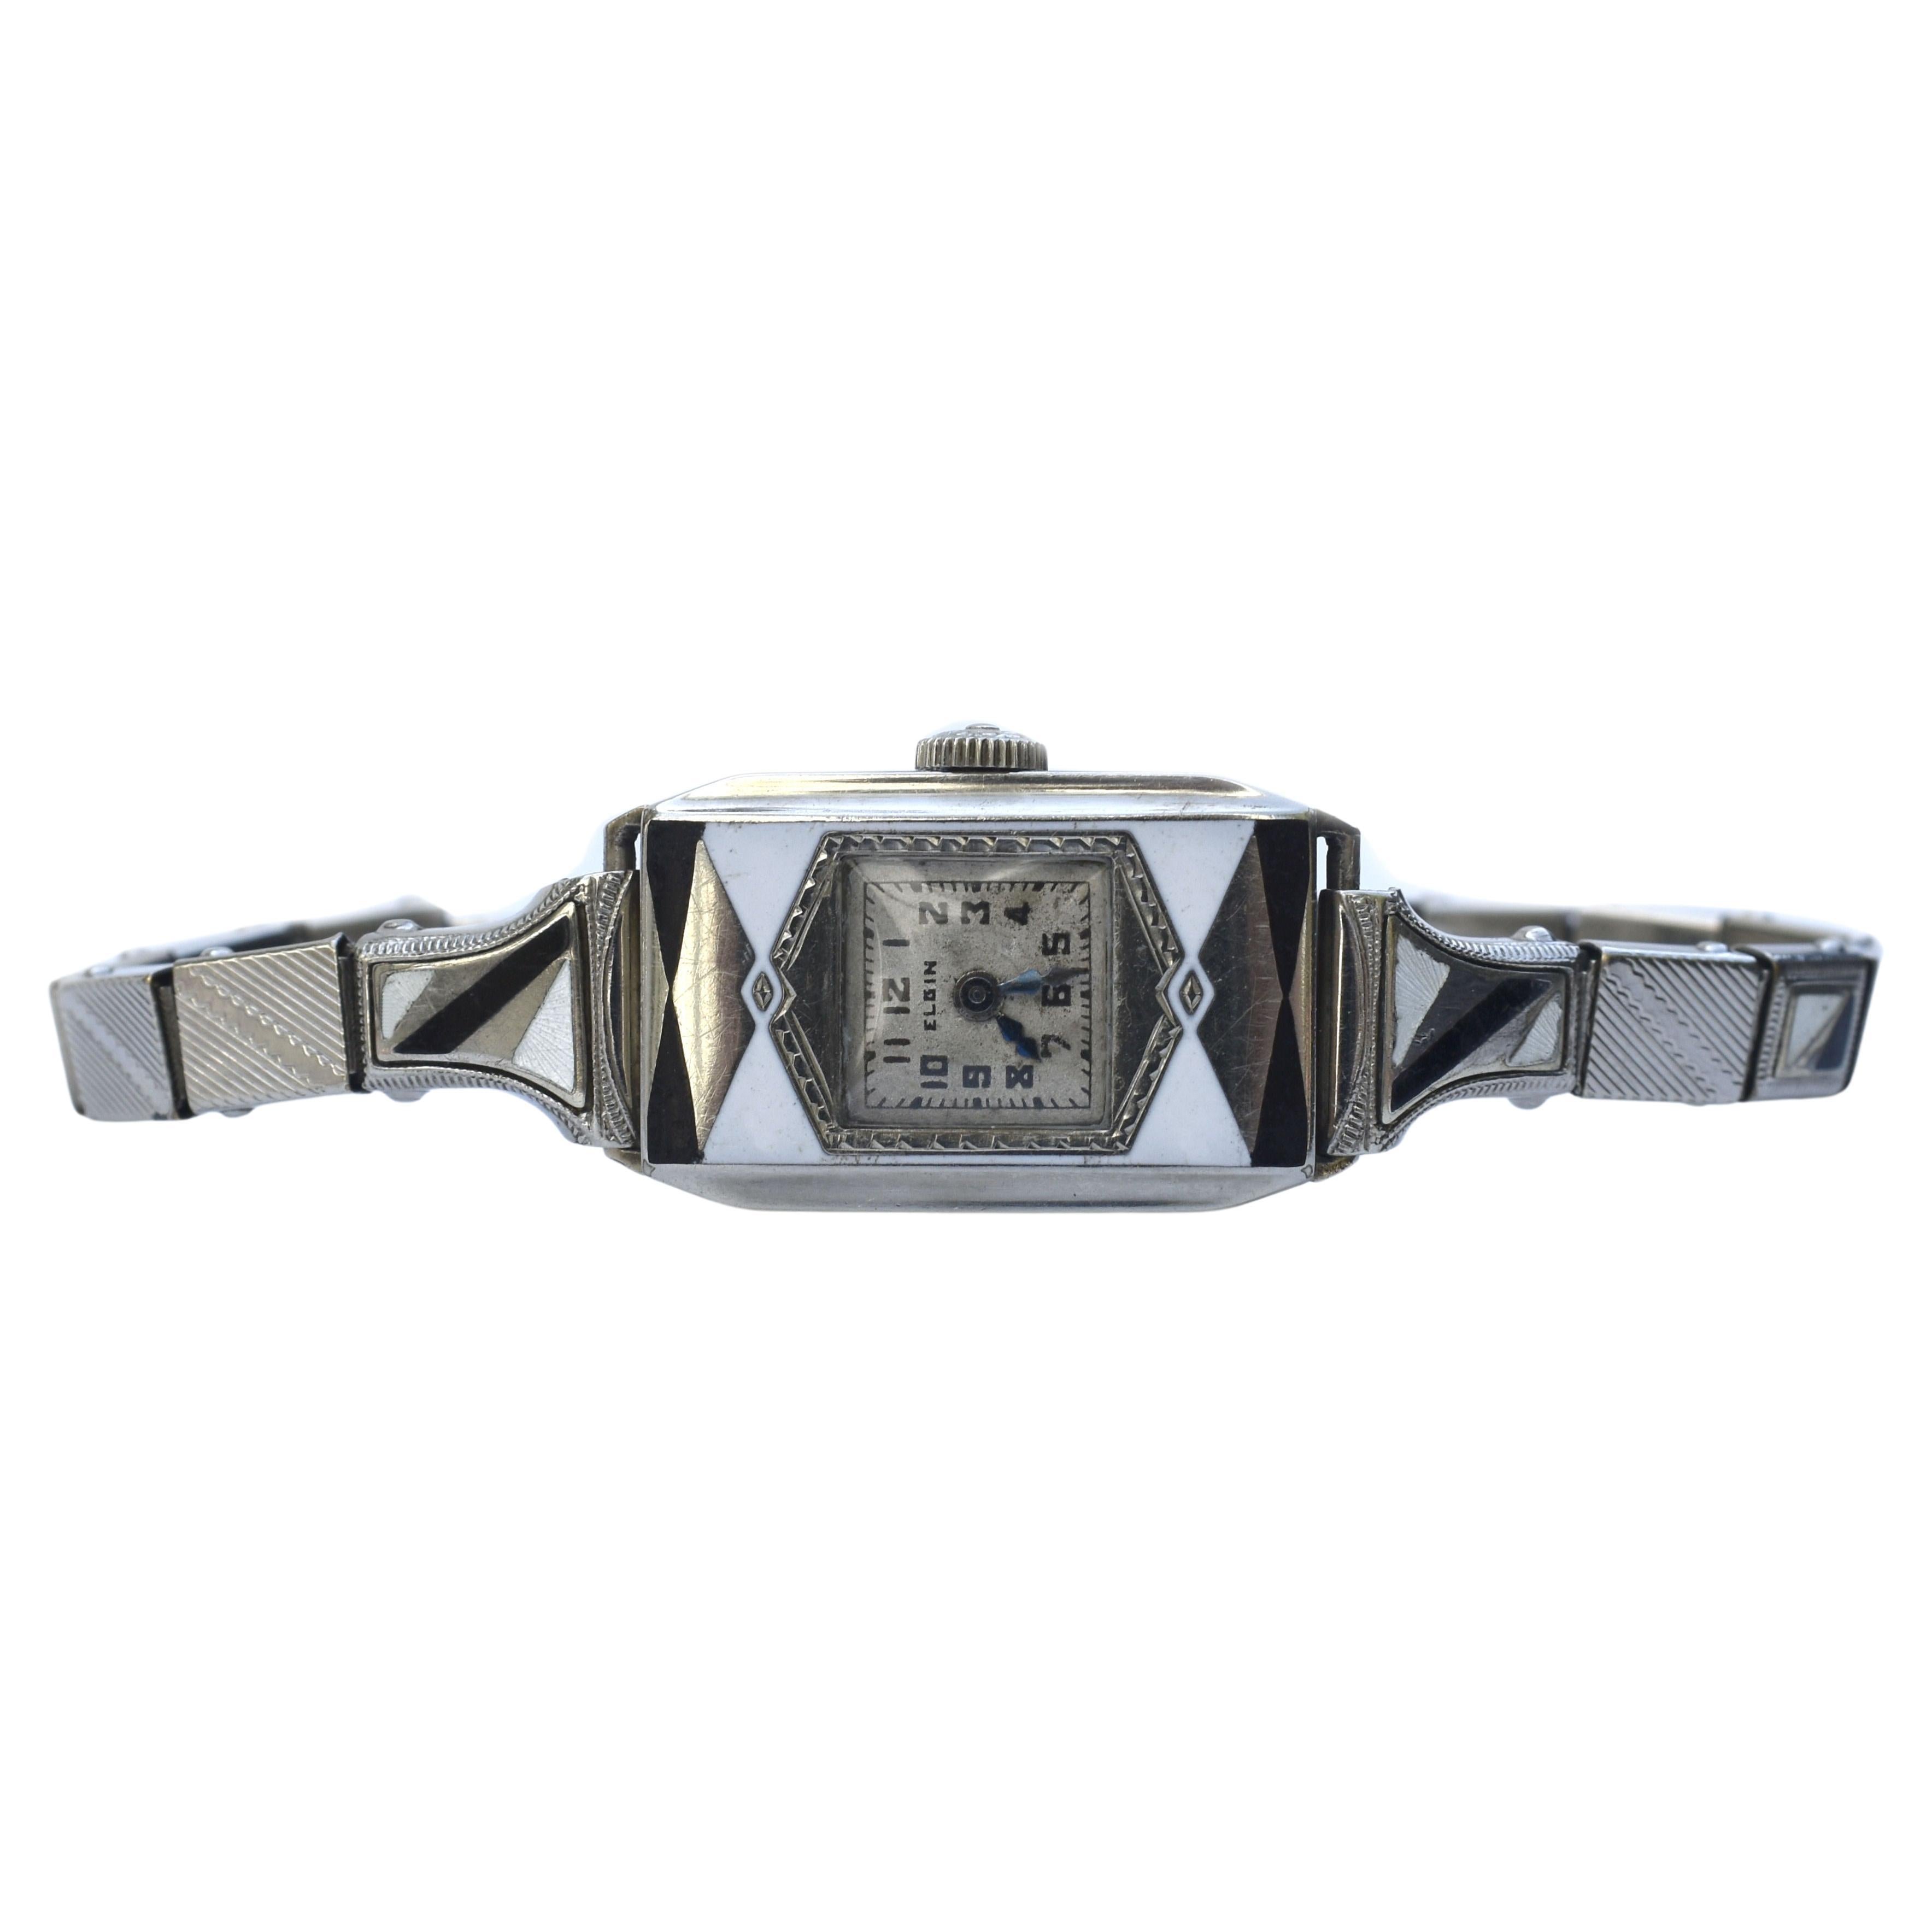 For your consideration is this lovely Art Deco ladies wrist watch which looks great for both evening and day dress. Made by the US watchmakers company Elgin with serial number dating it to 1933, 89 years old!. The movement is 15 jewel manual wind